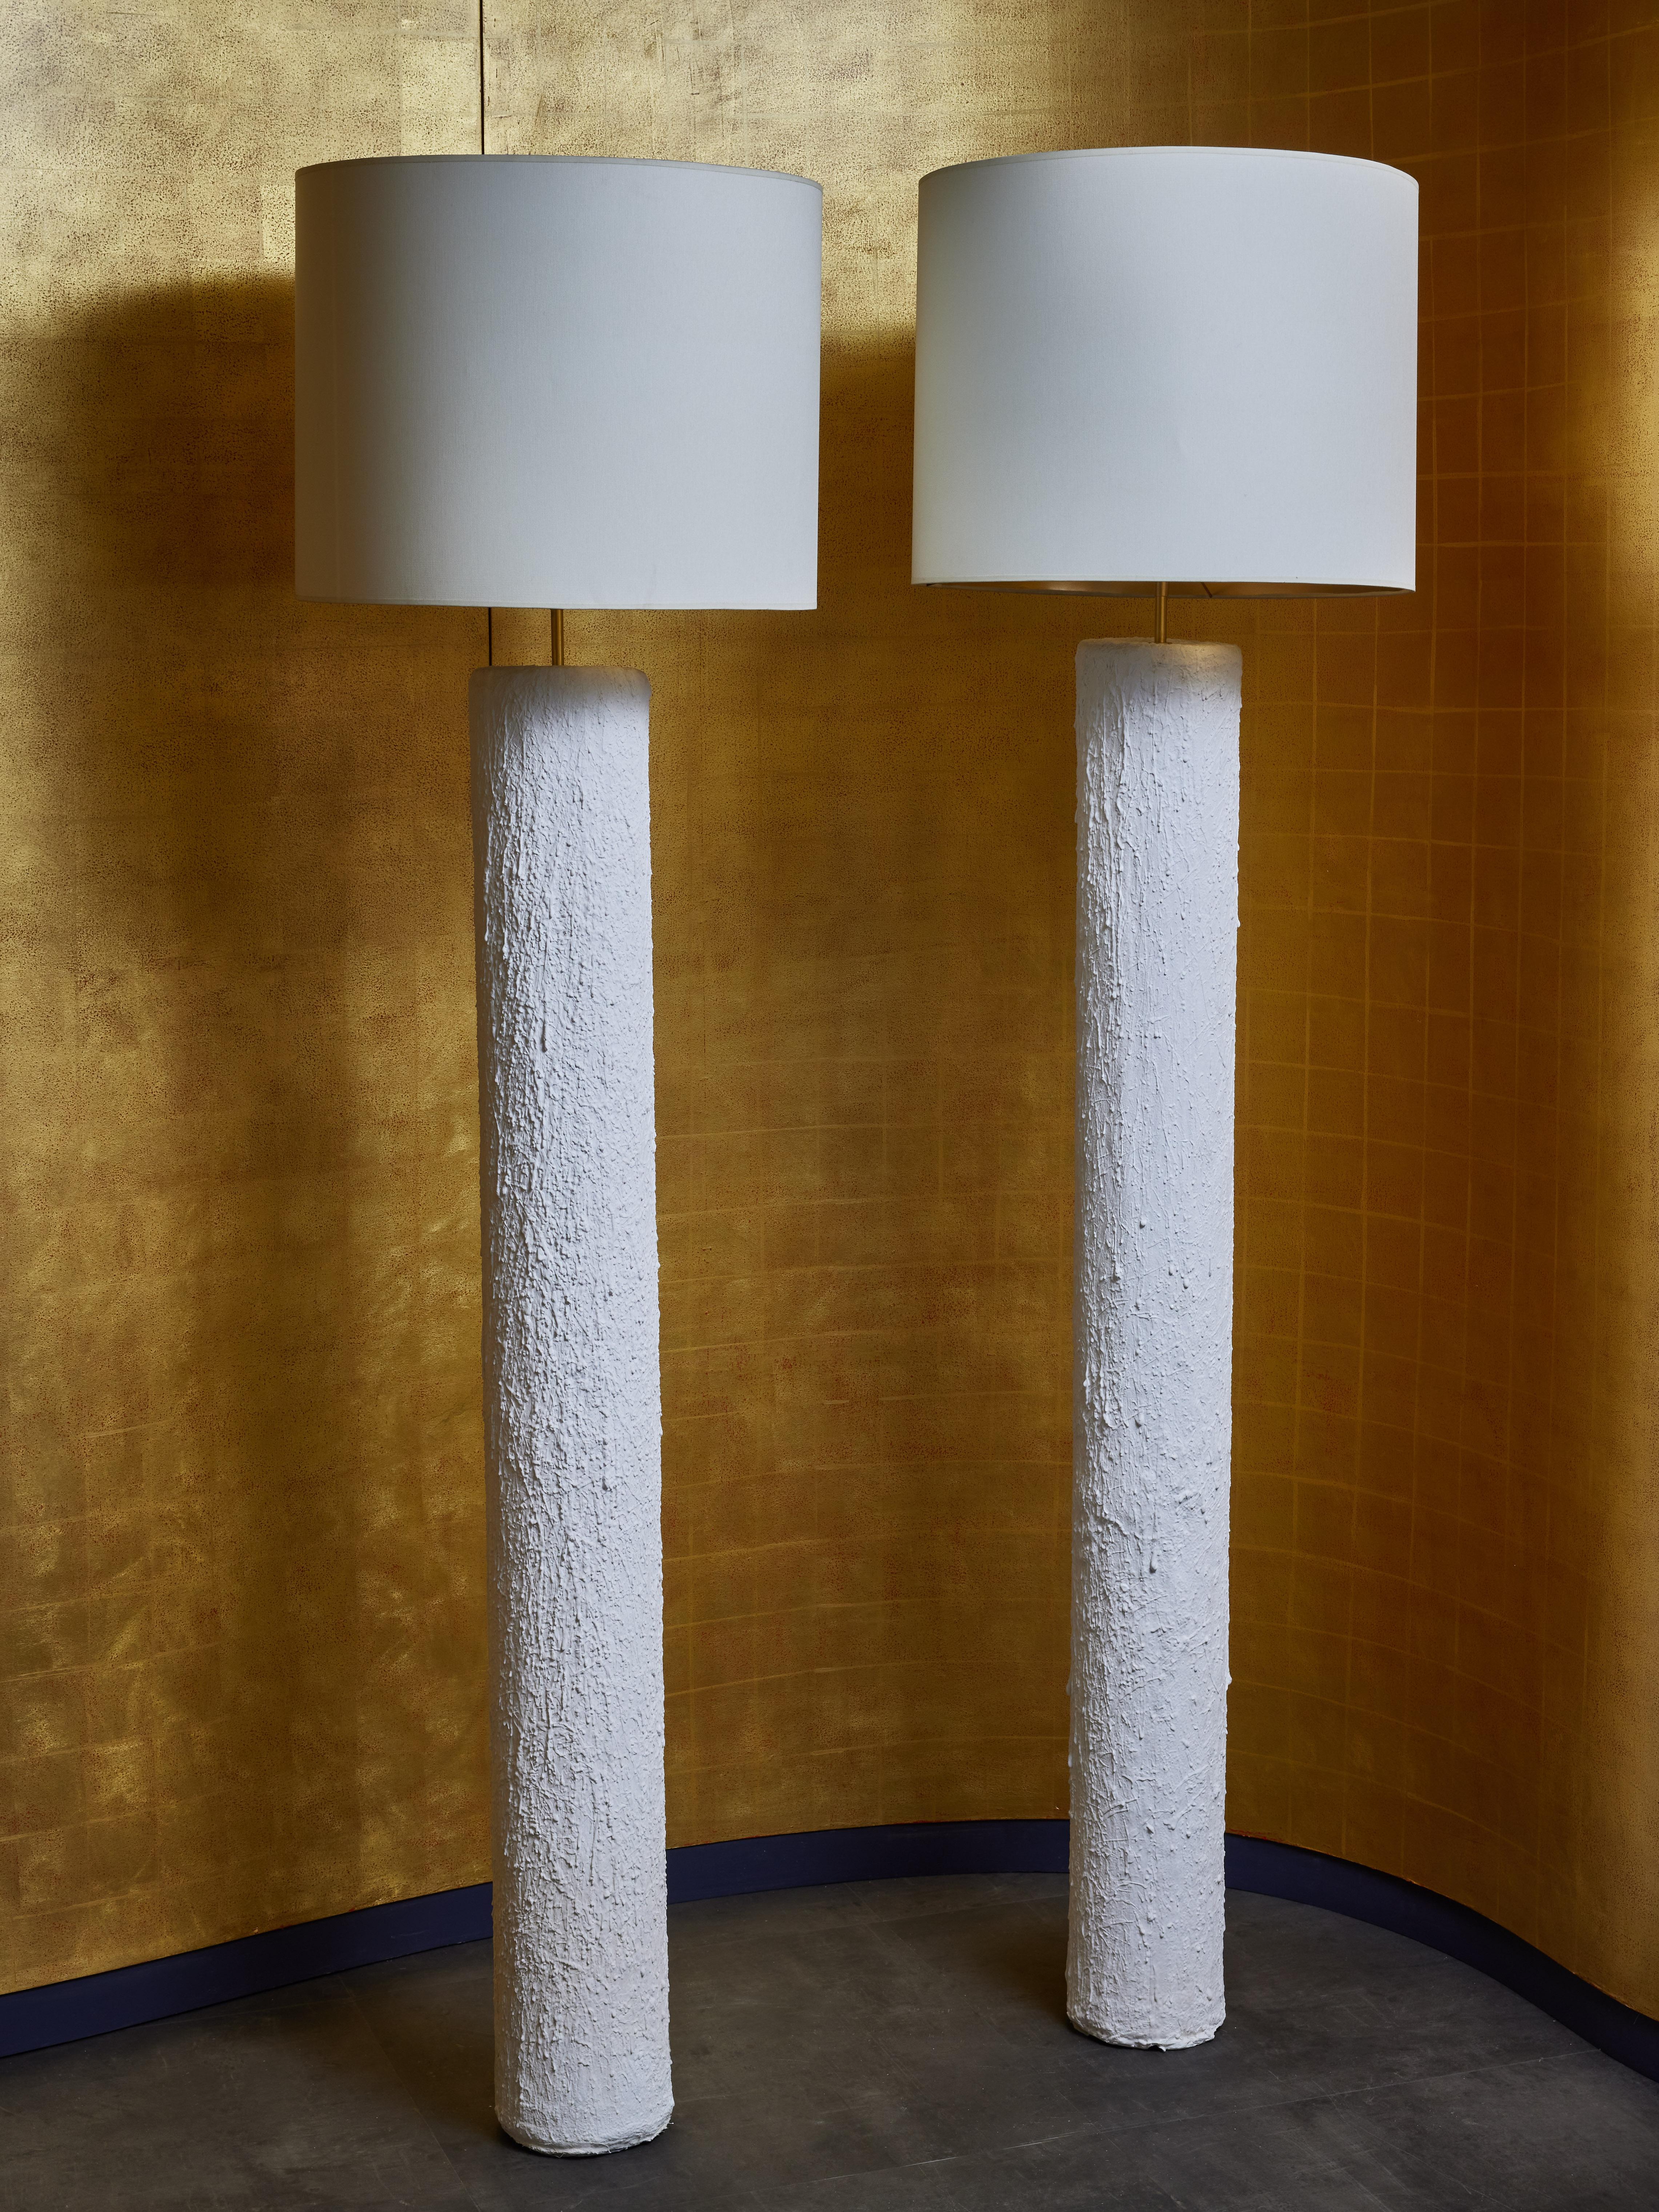 Pair of cylindrical floor lamps, made of steel covered in textured plaster.